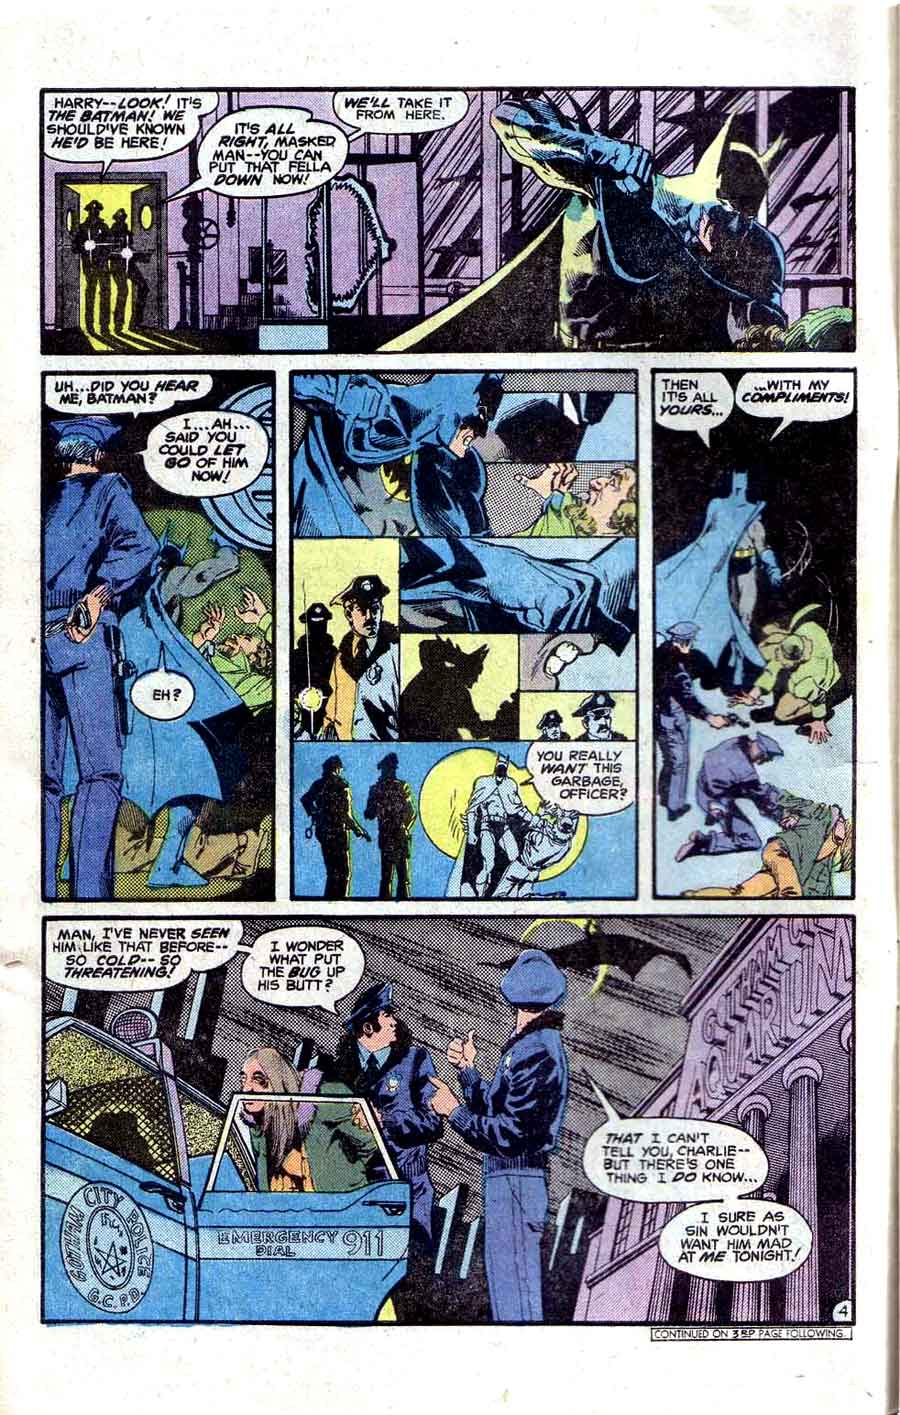 Detective Comics v1 #478 dc comic book page art by Marshall Rogers